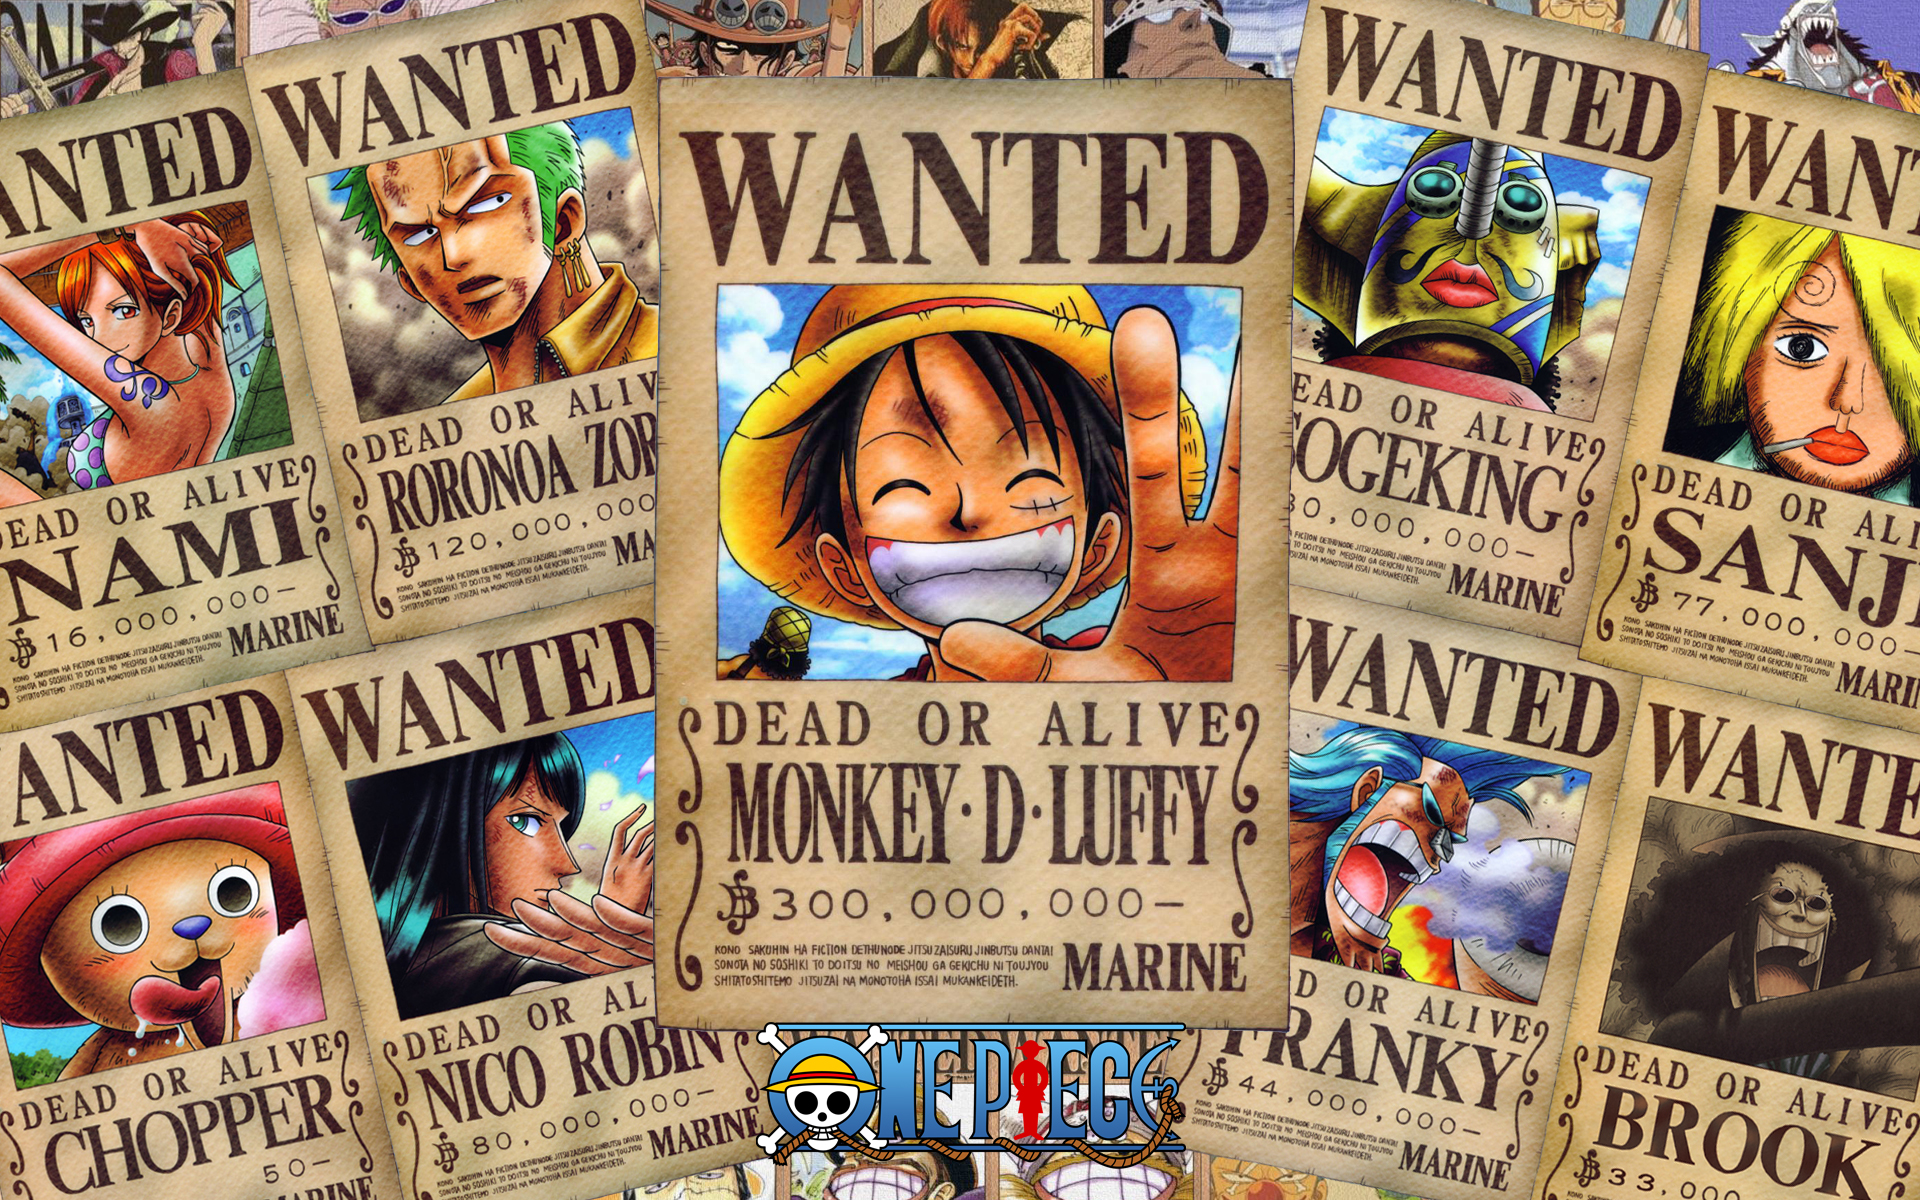 One Piece Wallpaper Wanted